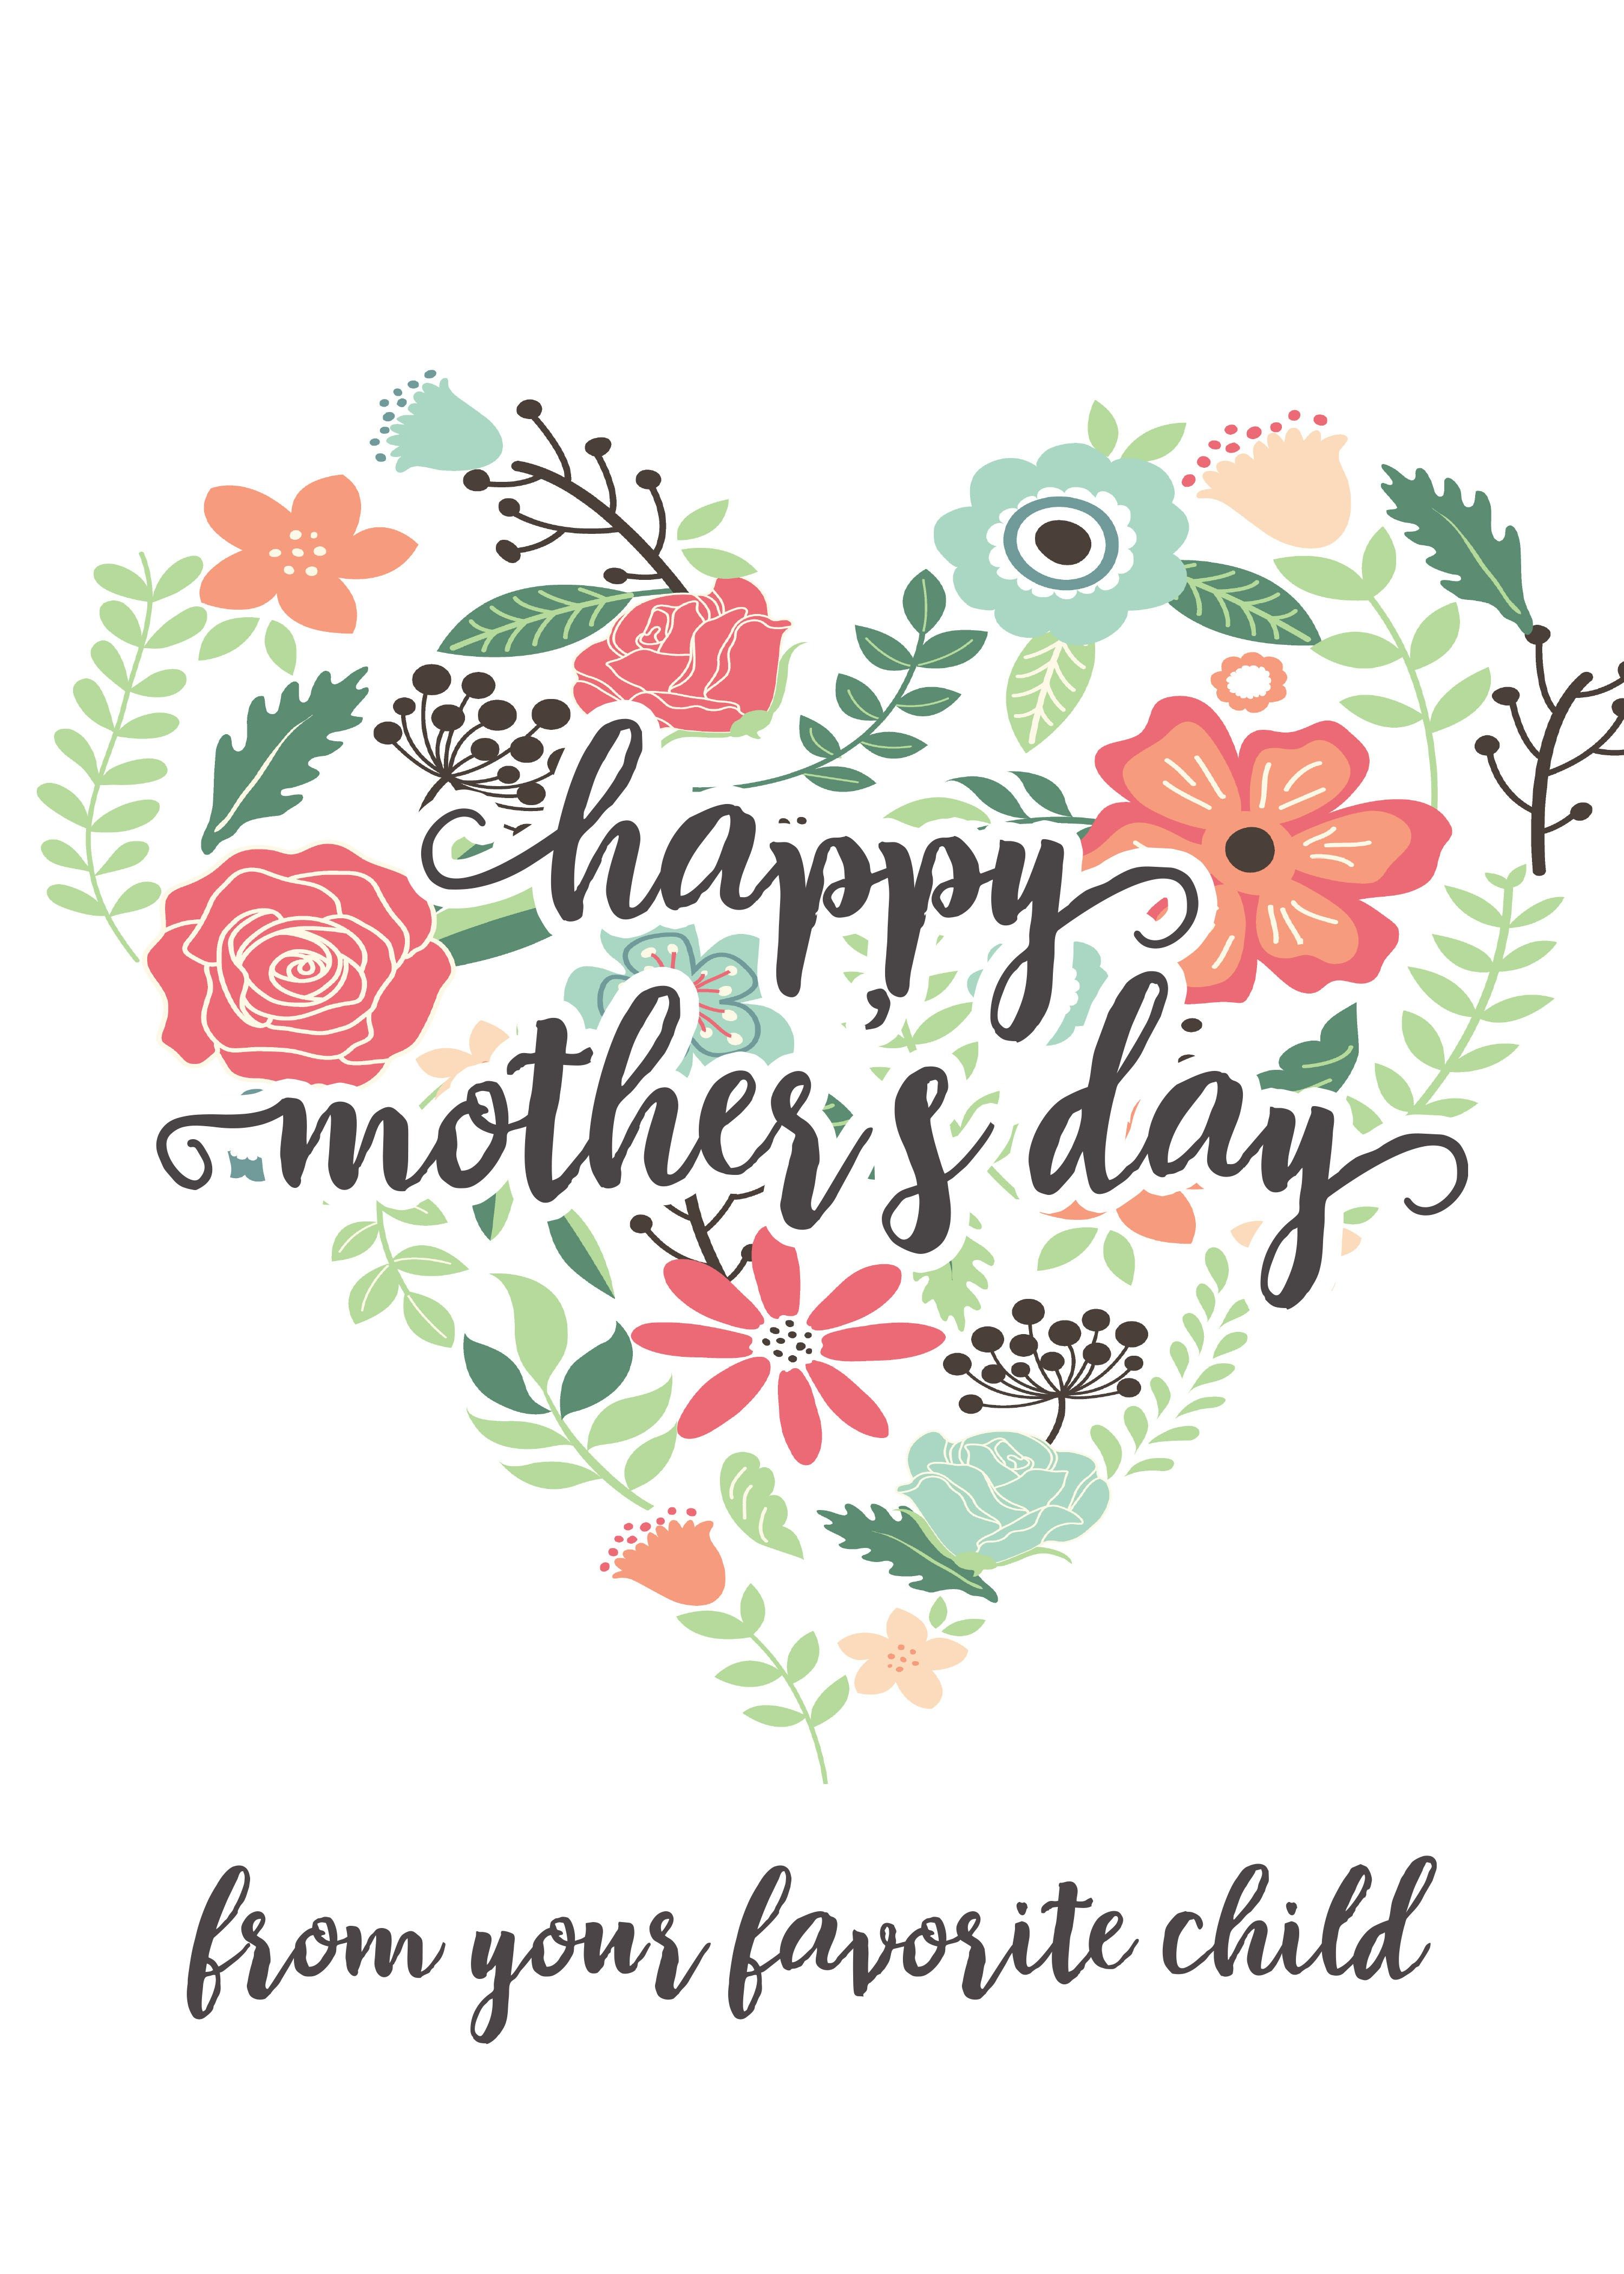 Pin by Frances Nelson on Family | Pinterest | Happy mothers, Free ...